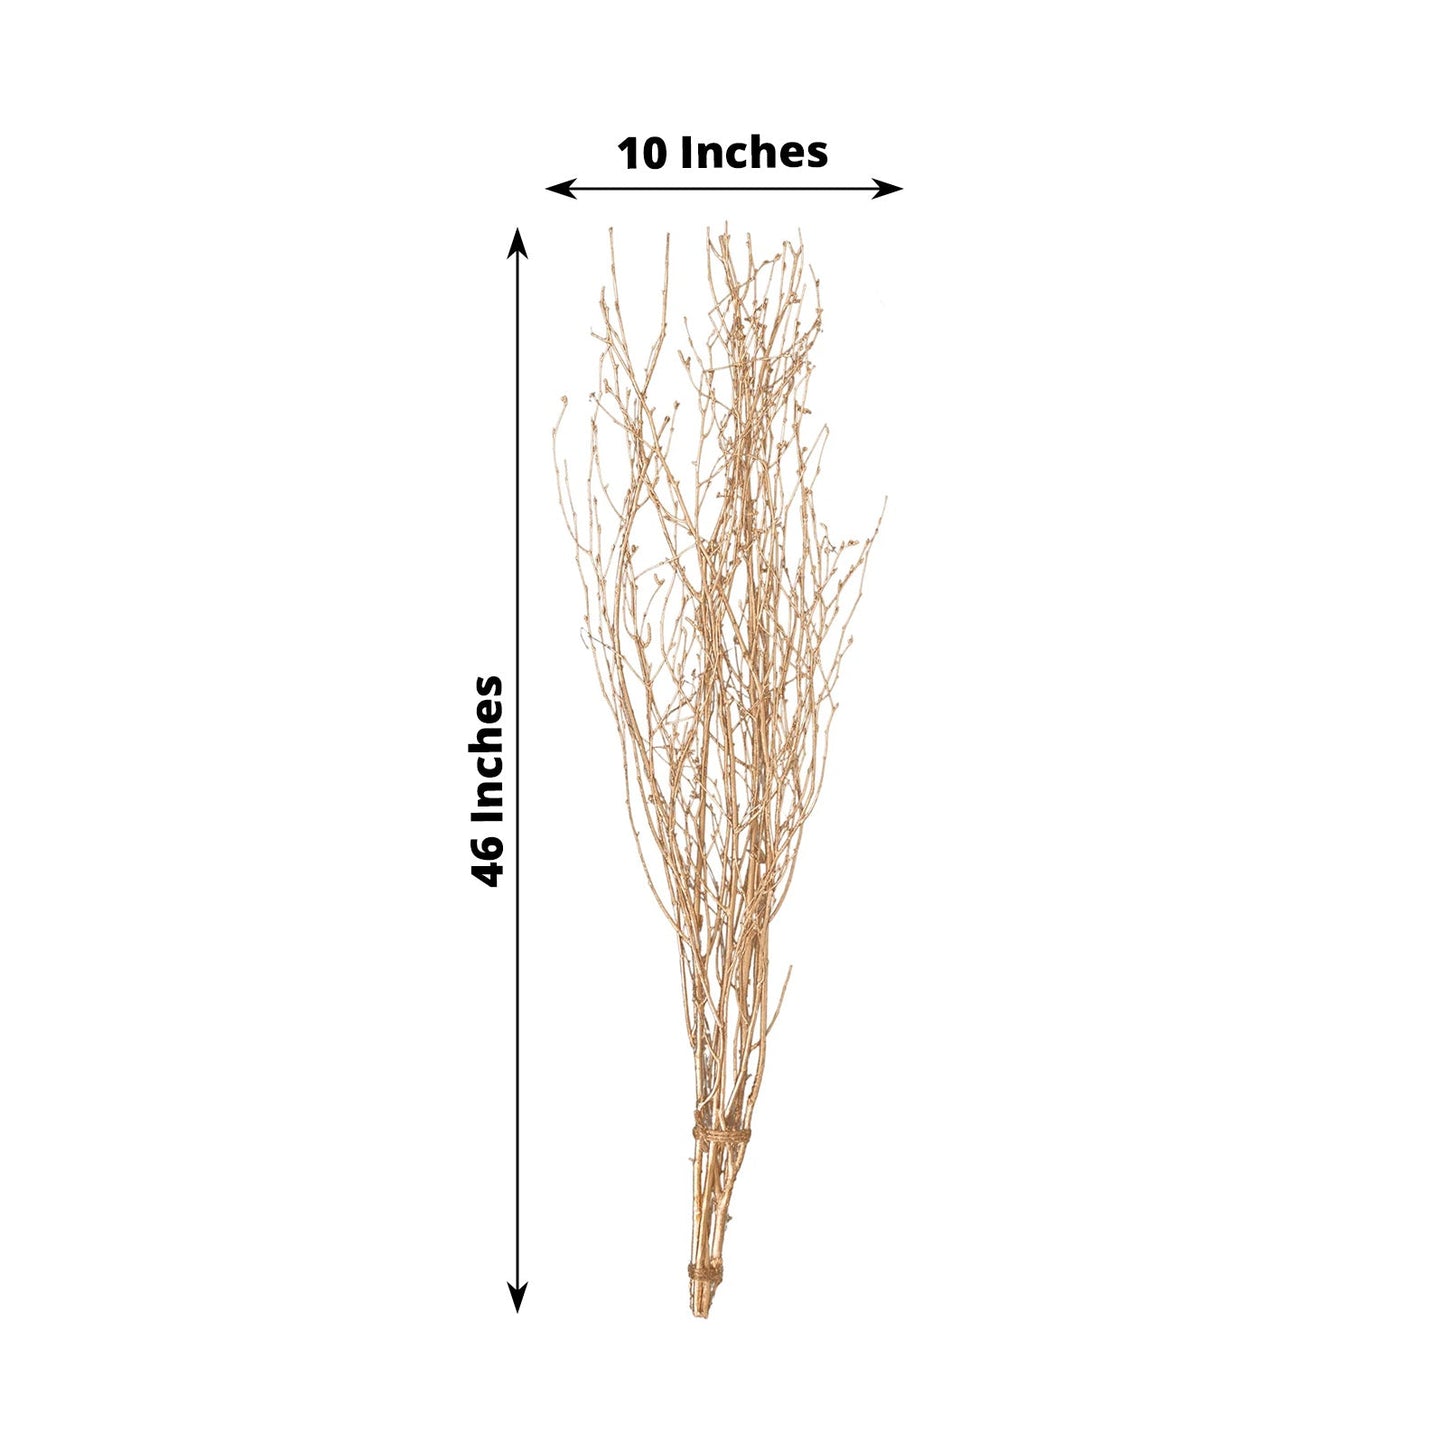 6 Pack Metallic Gold Decorative Birch Tree Branches, Extra Long Natural Dried Willow Twigs Sticks Vase Fillers - 46"